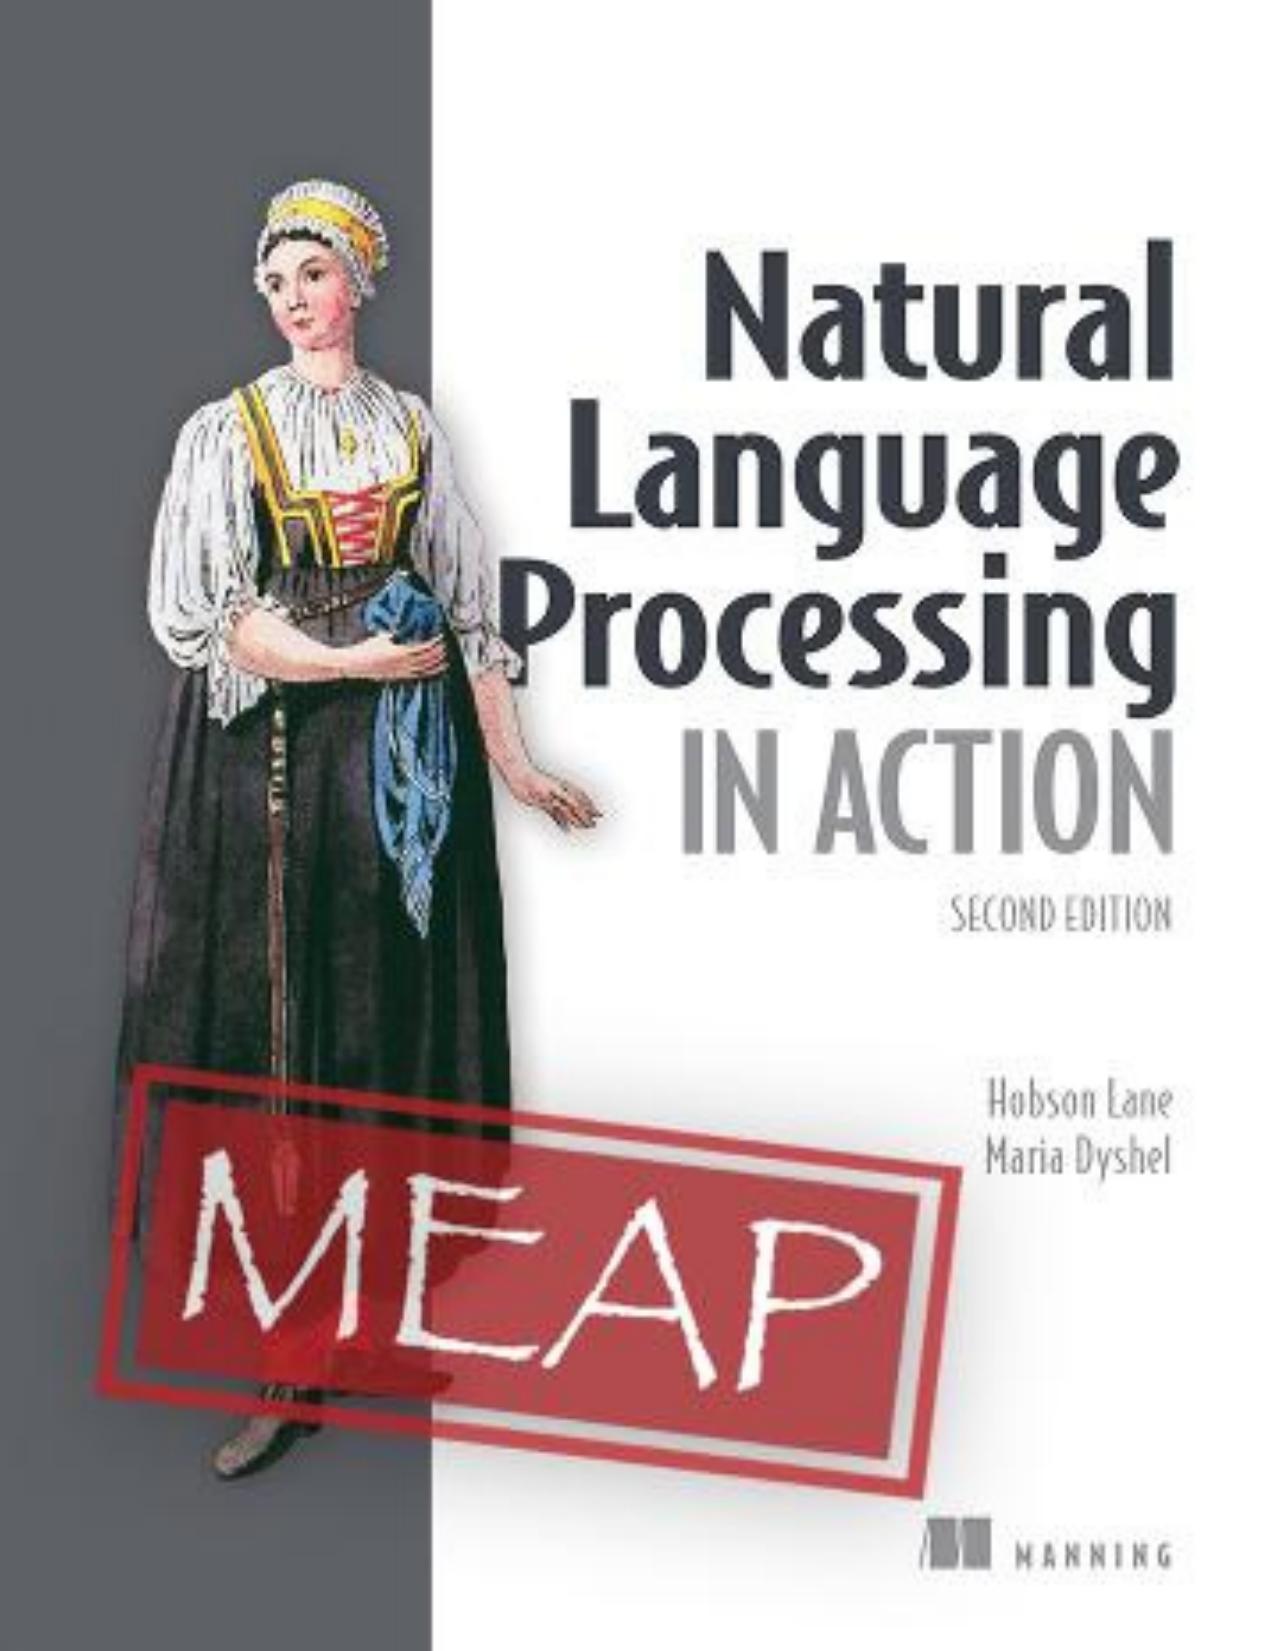 Natural Language Processing in Action, Second Edition MEAP V09 by Maria Dyshel and Hobson Lane